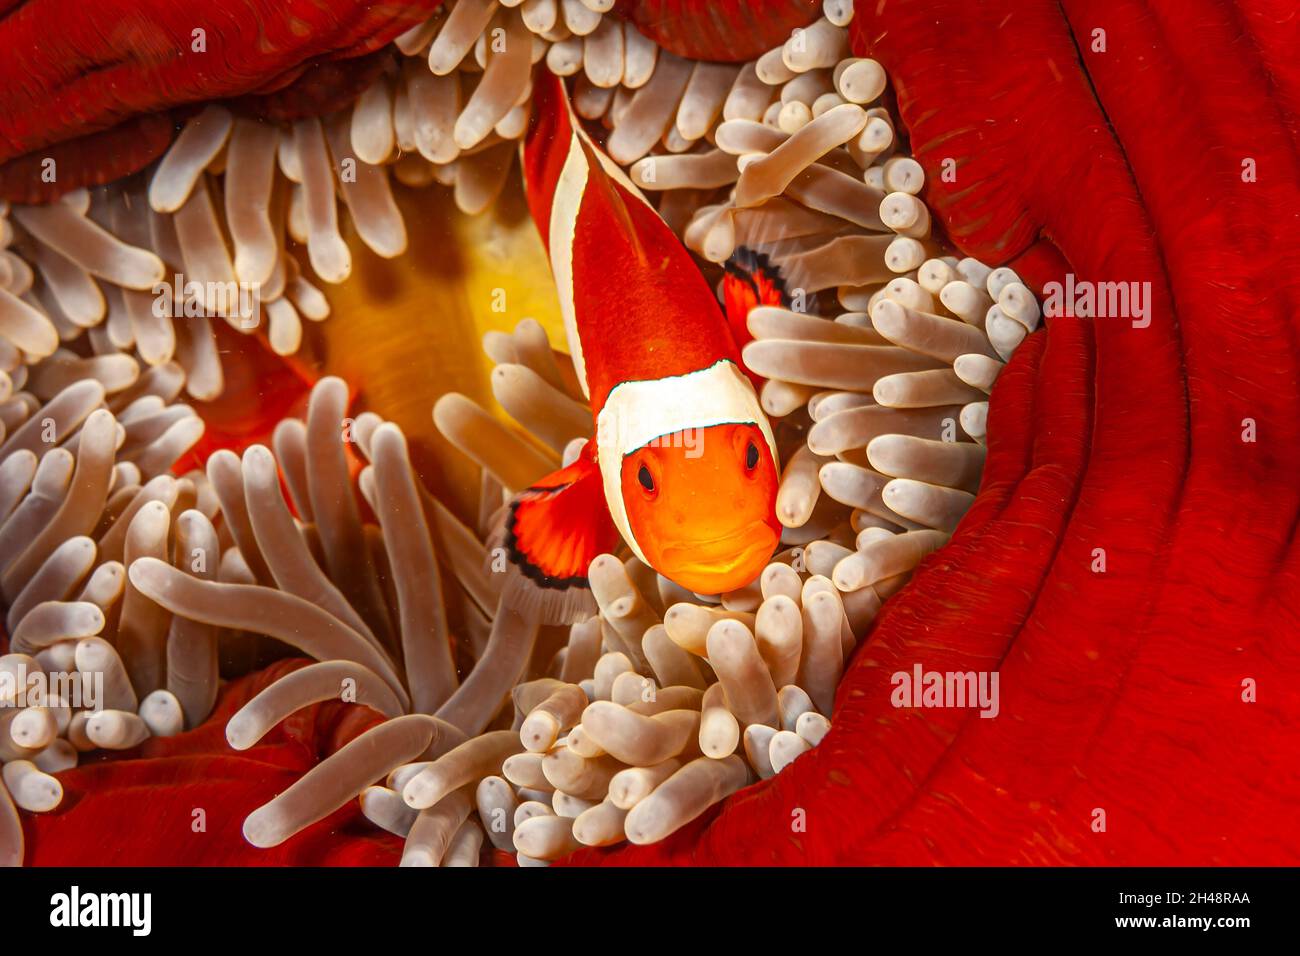 Clownfish or anemonefish are fishes from the subfamily Amphiprioninae in the family Pomacentridae. Stock Photo